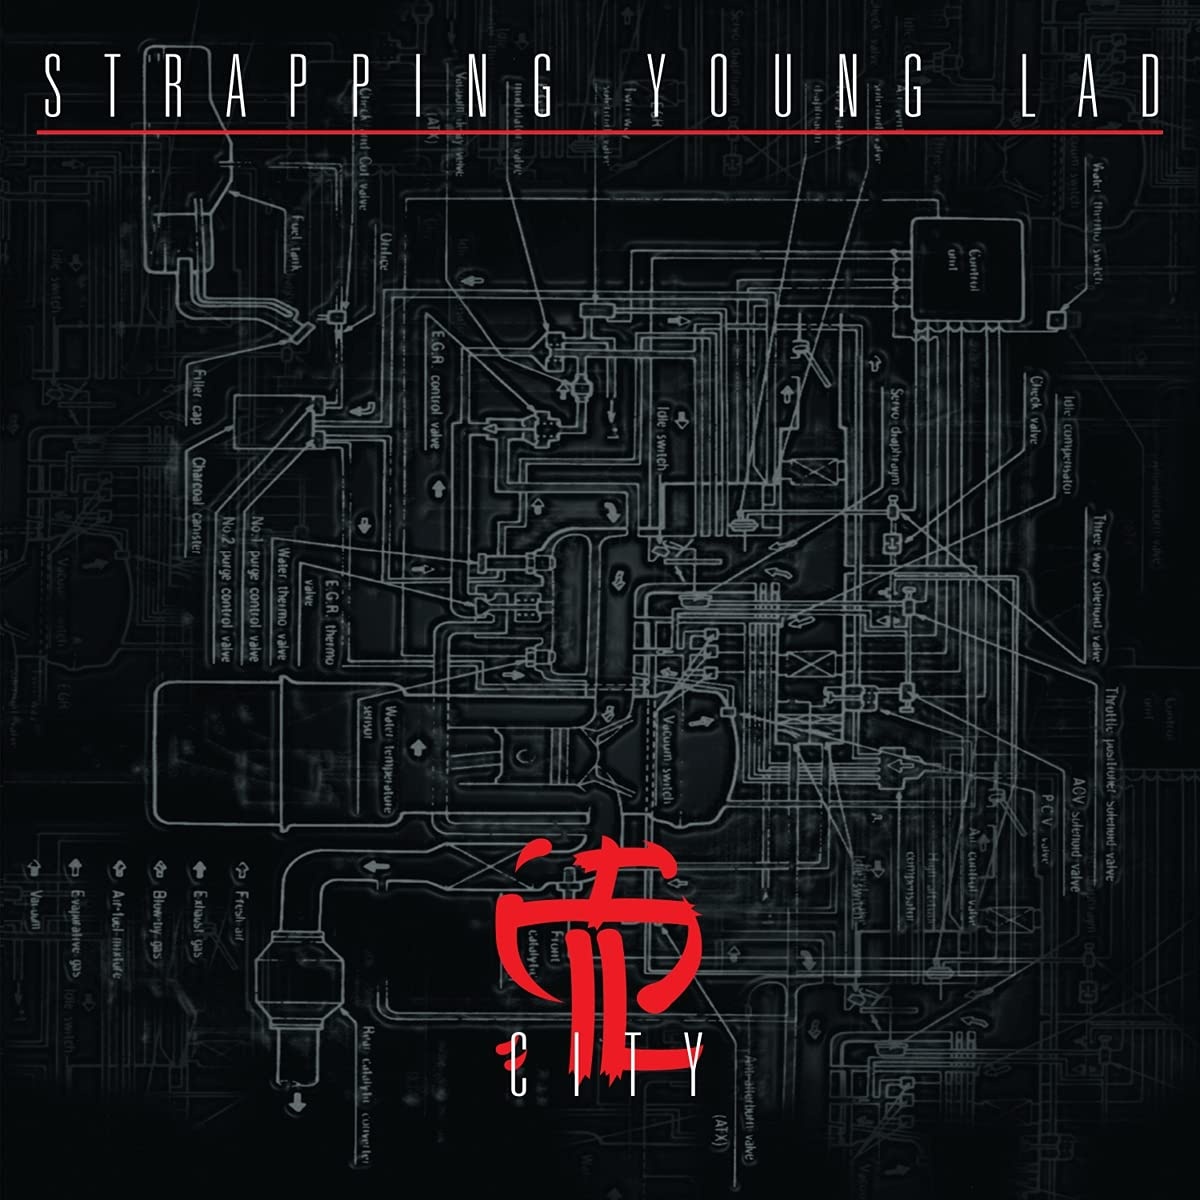 Strapping young. Strapping young lad. Strapping young lad группа. Strapping young lad мерч. Strapping young lad 2005 Alien.